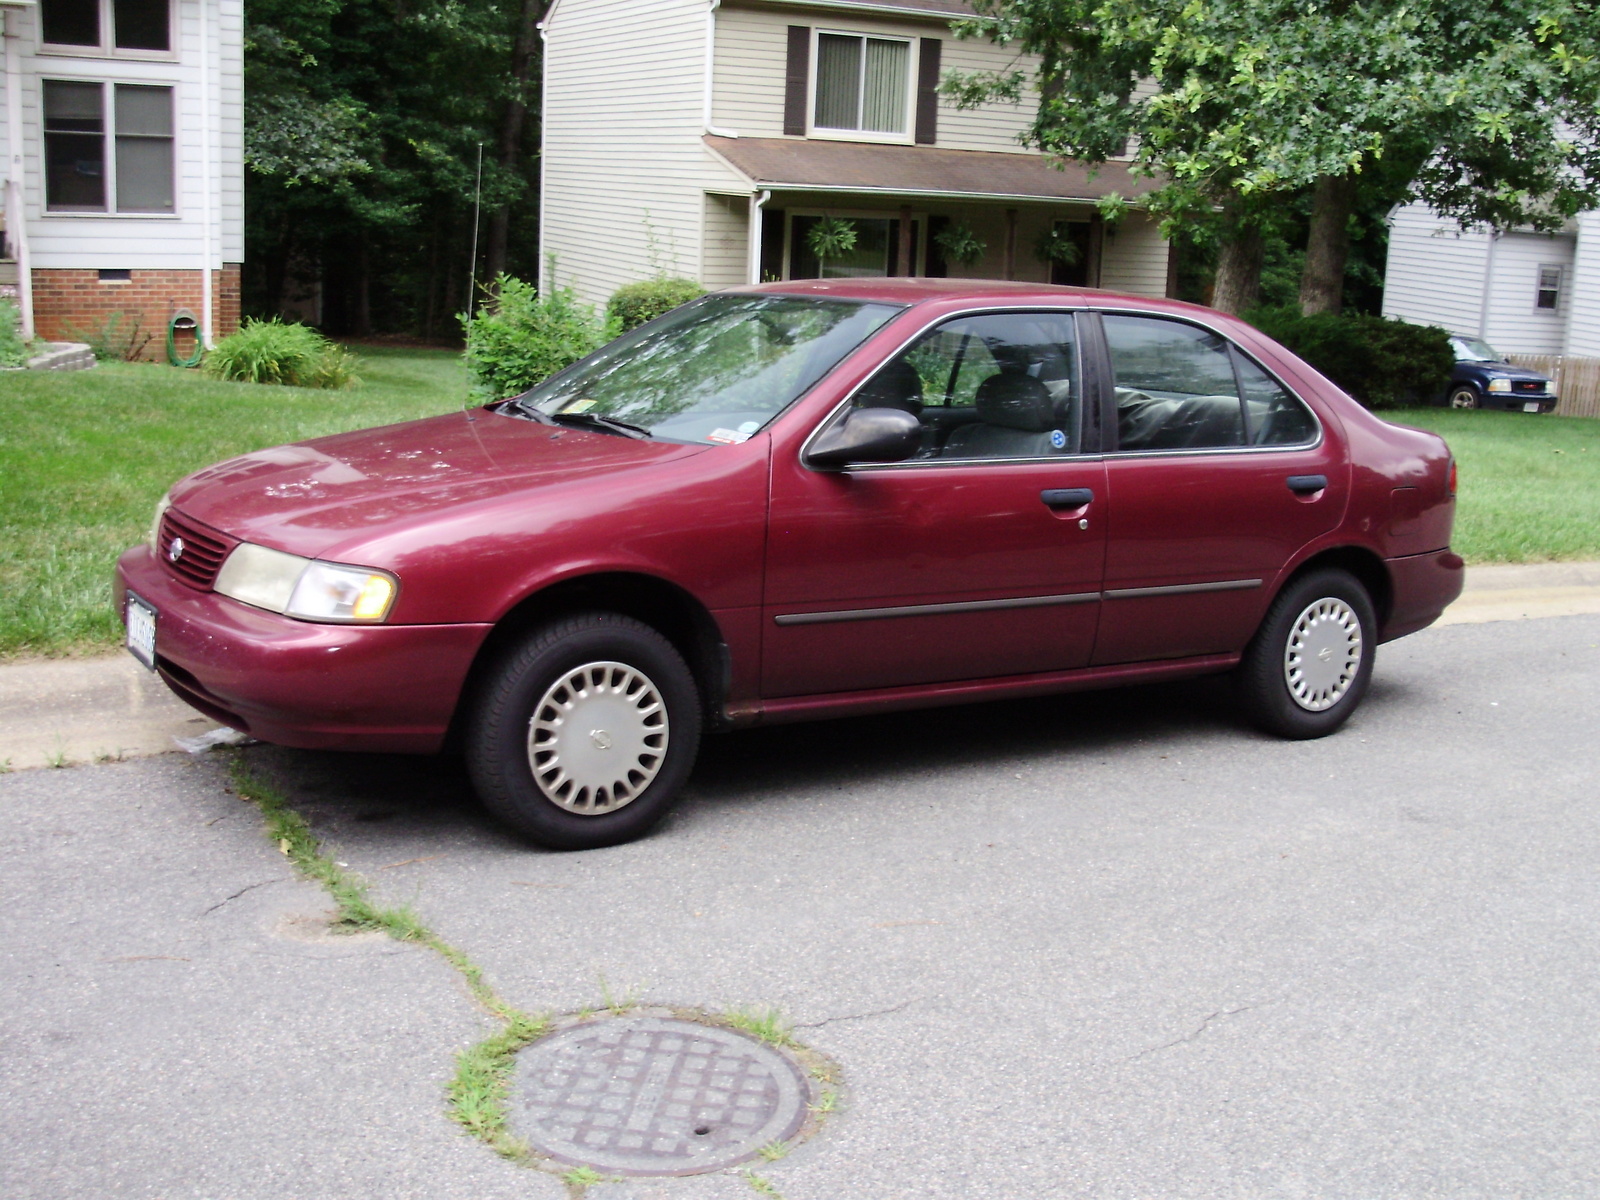 1997 Nissan sentra gxe consumer review #6